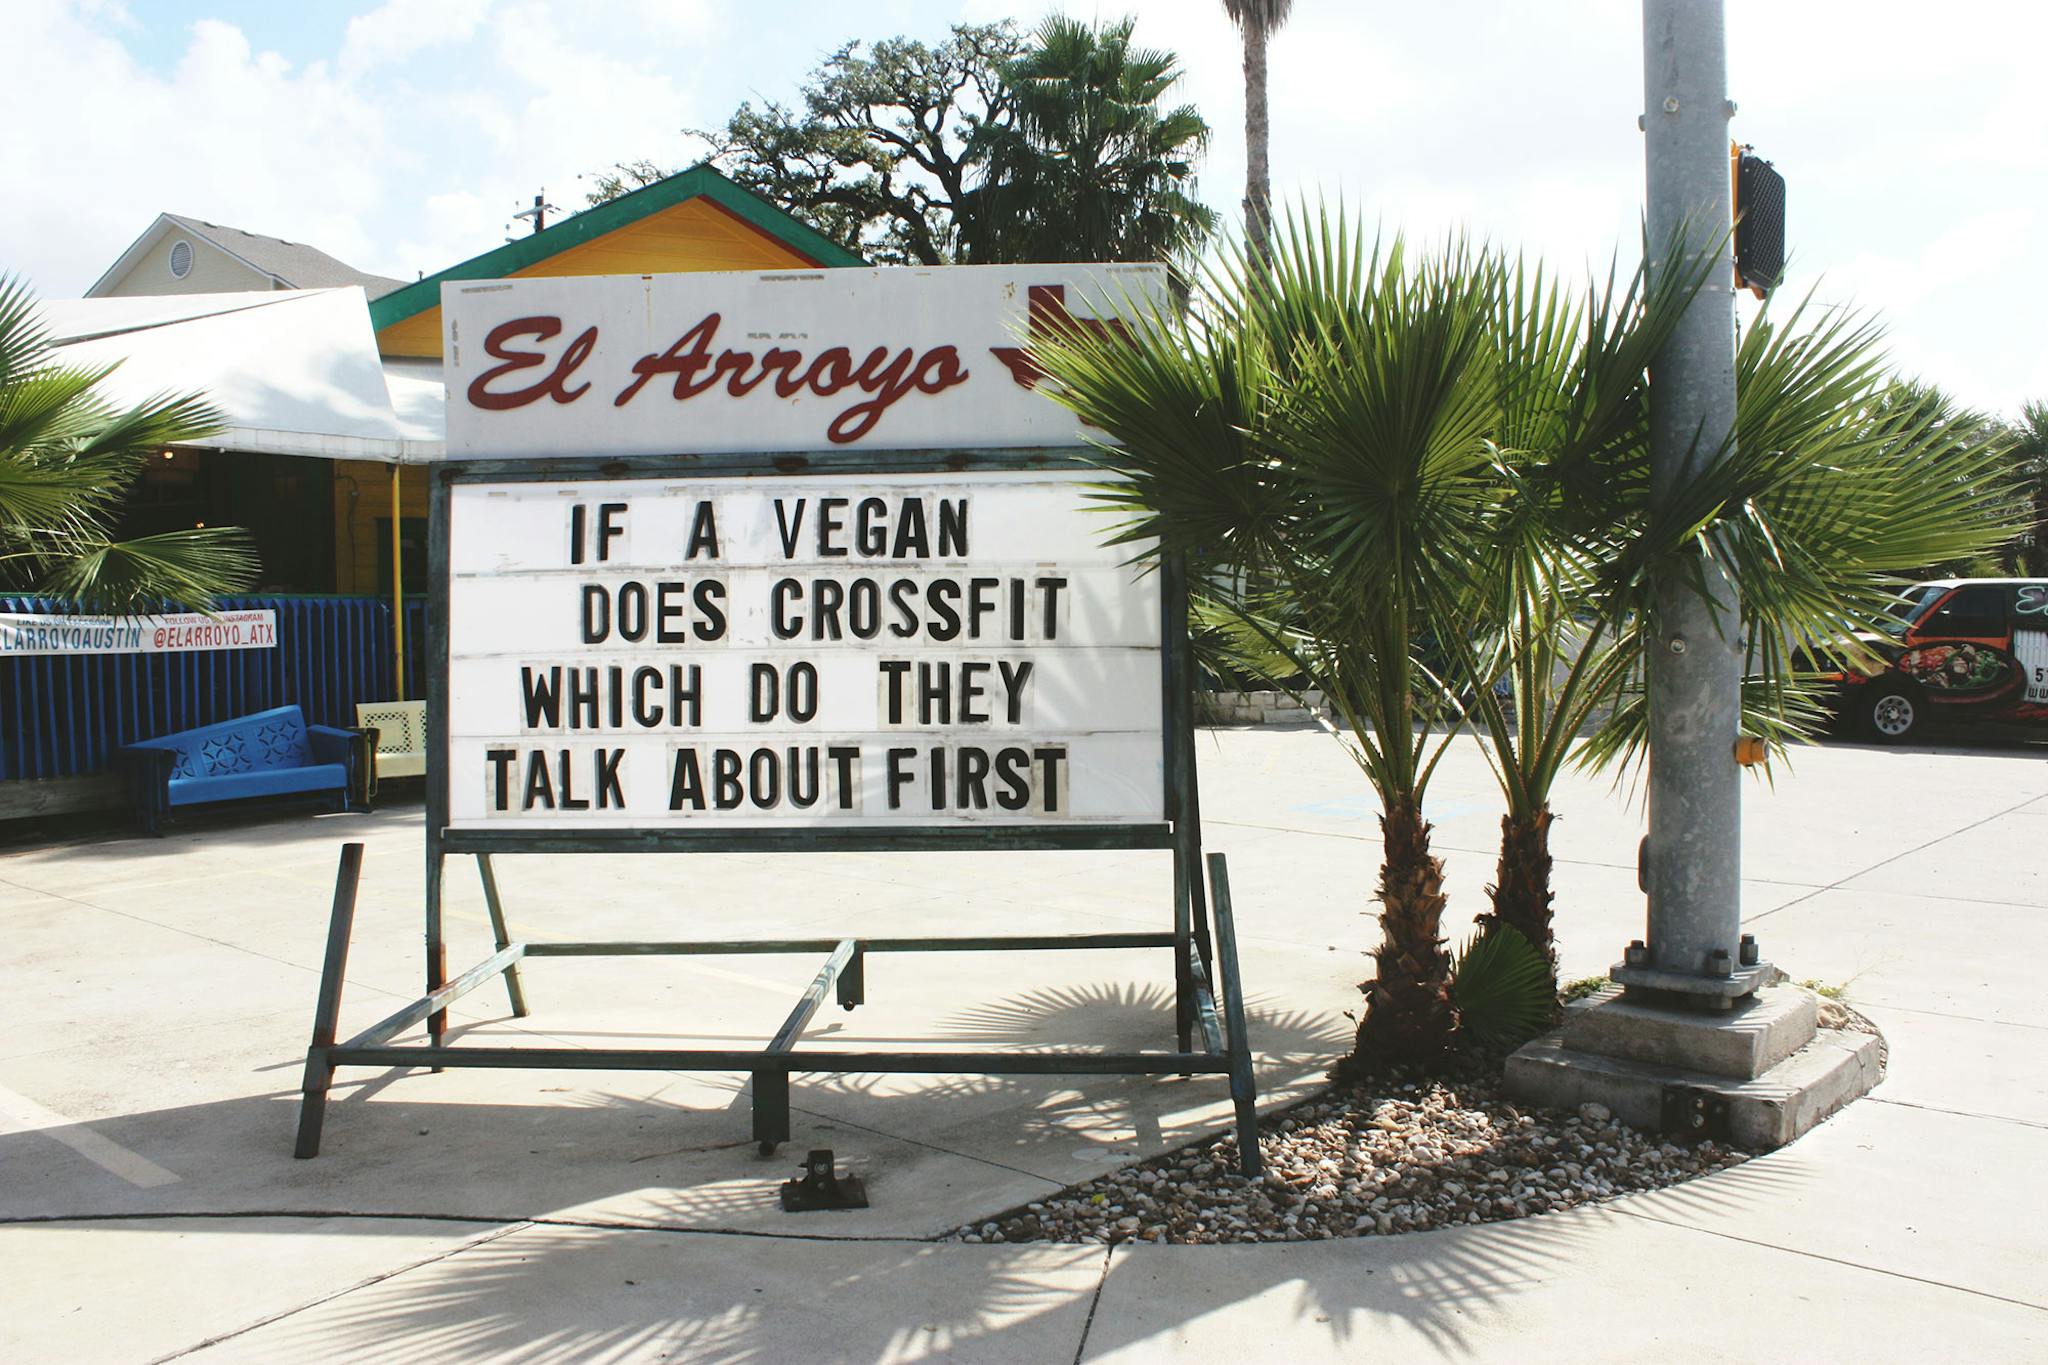 El Arroyo sign says if a vegan does crossfit which do they talk about first?